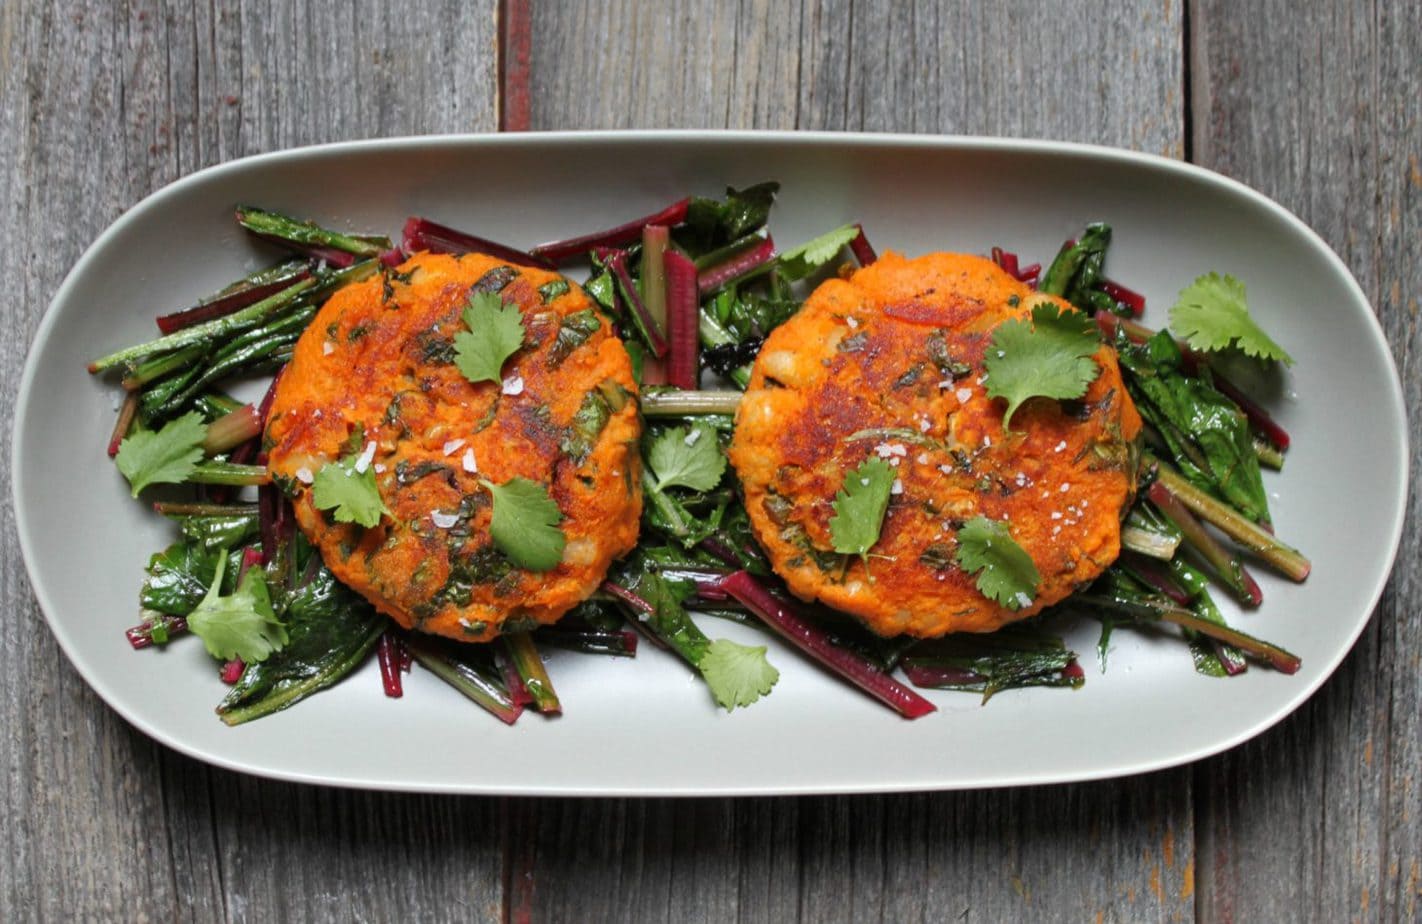 Foodies rejoice, you can have your lawn and eat it too! Celebrate the first signs of Spring with these Sweet Potato Patties on Sautéed Dandelion Greens. The sweet nature of the Sweet Potato Patties are a perfect companion to the bitter dandelion greens. Season with coarse flaky salt and enjoy! #vegan #sweetpotatoes #dandelion #foraged